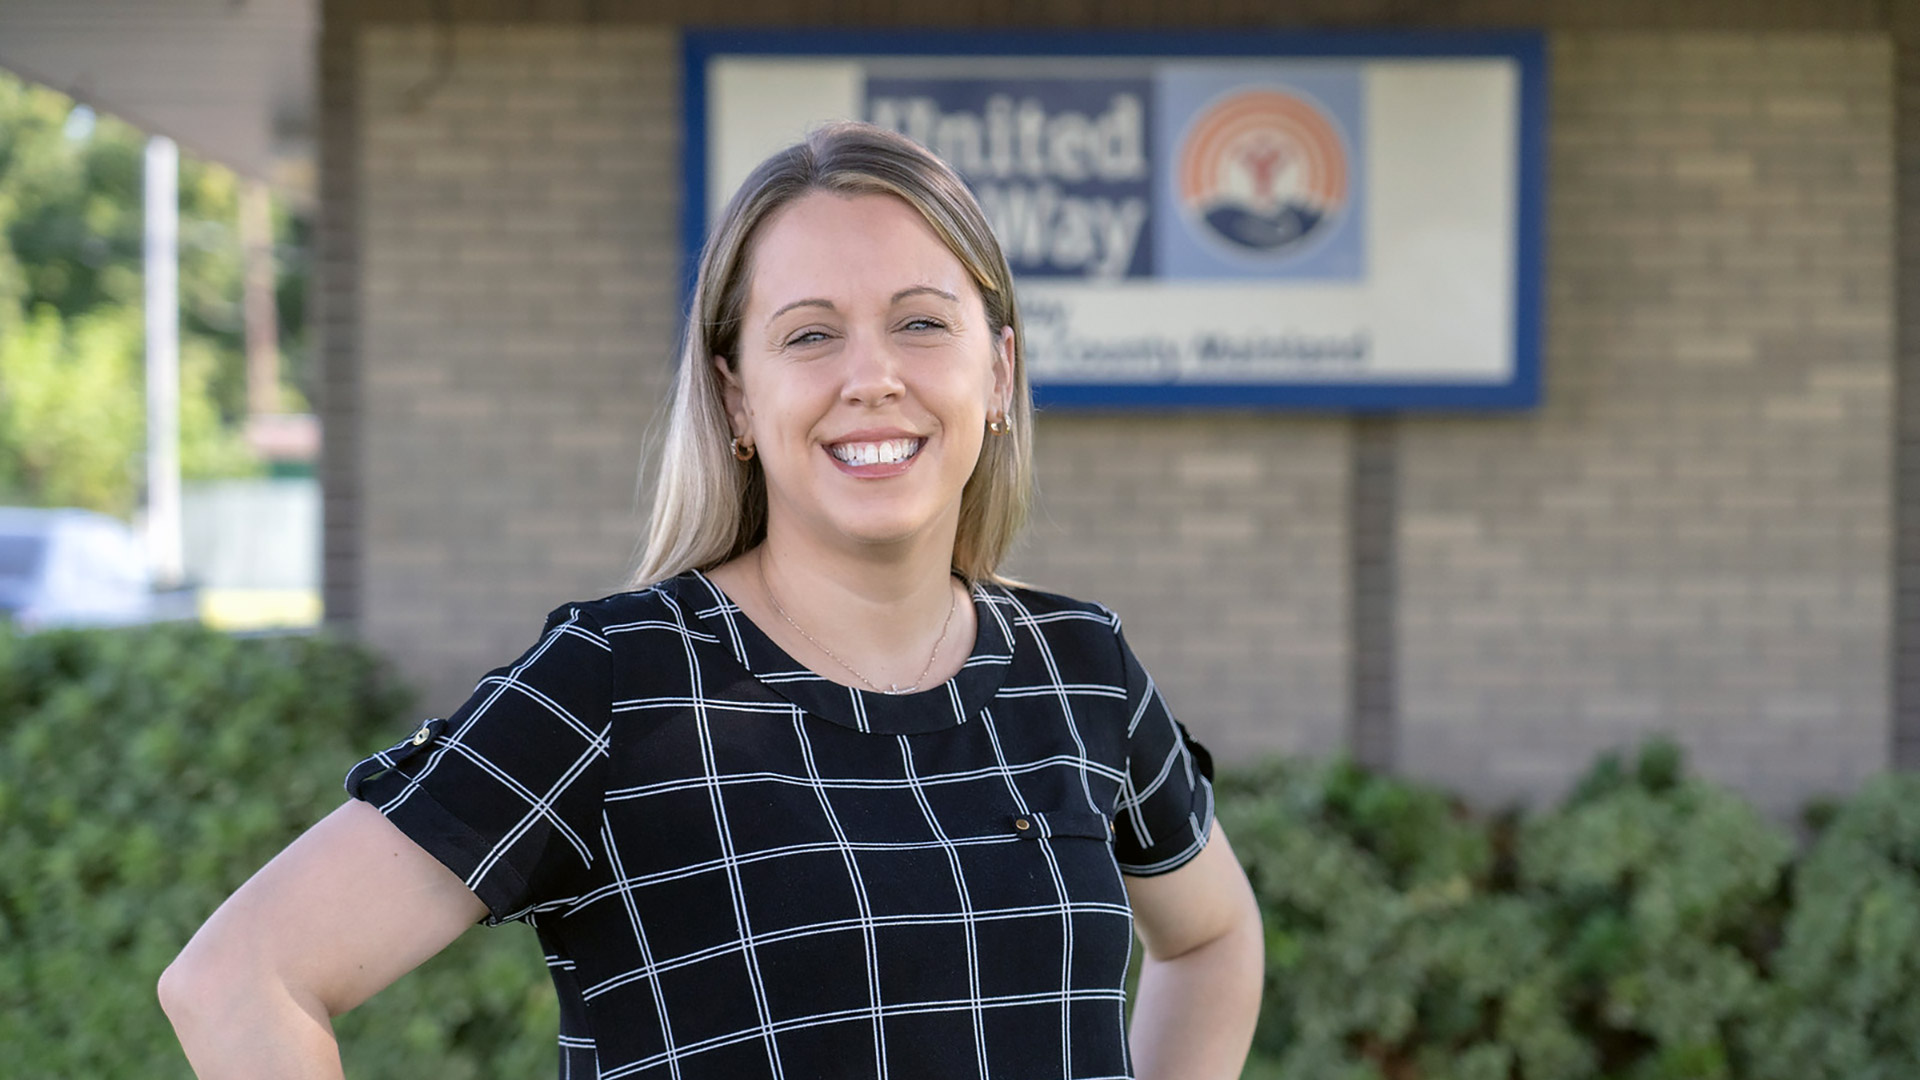 From United Way client to executive director, alum rebuilt with education